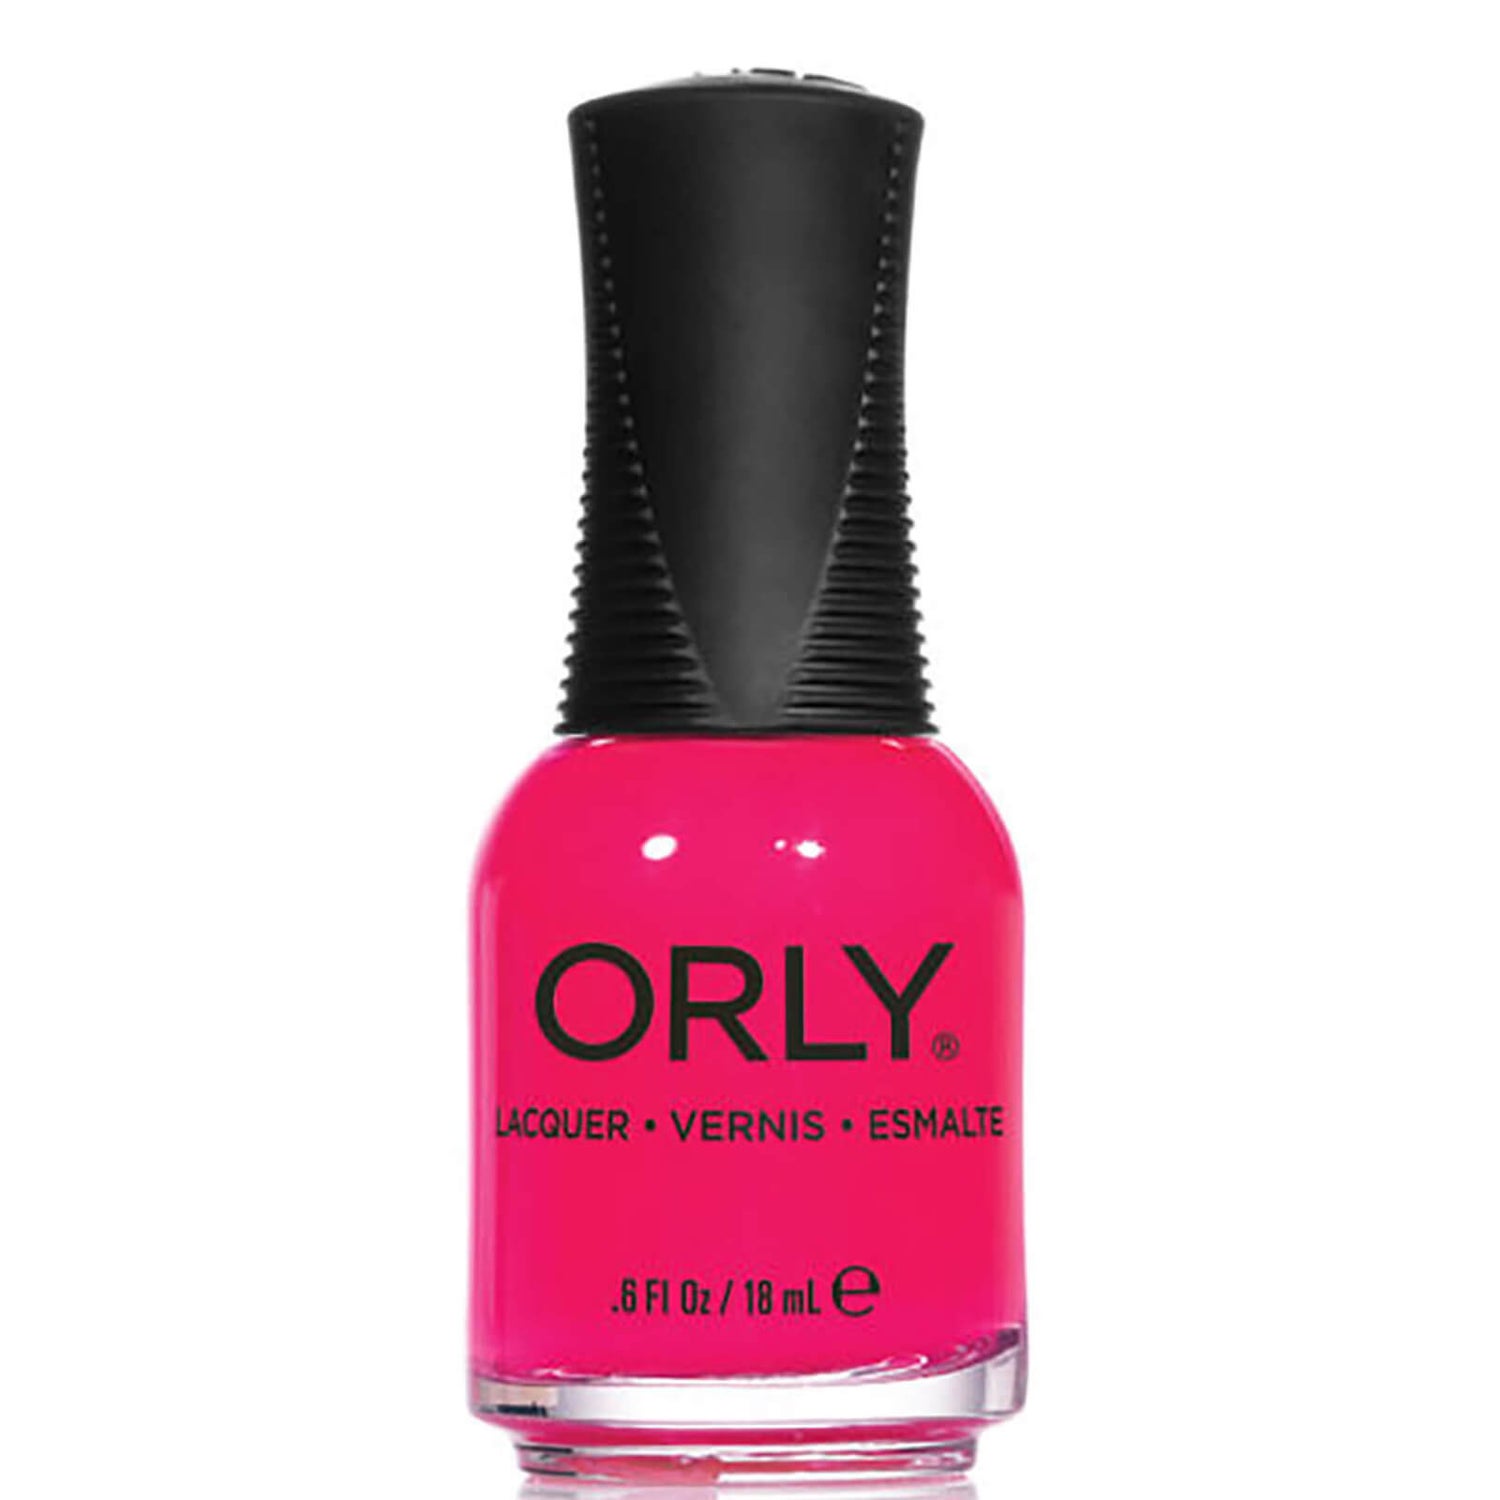 ORLY Nail Lacquer 18ml (Various Shades) - Passion Fruit